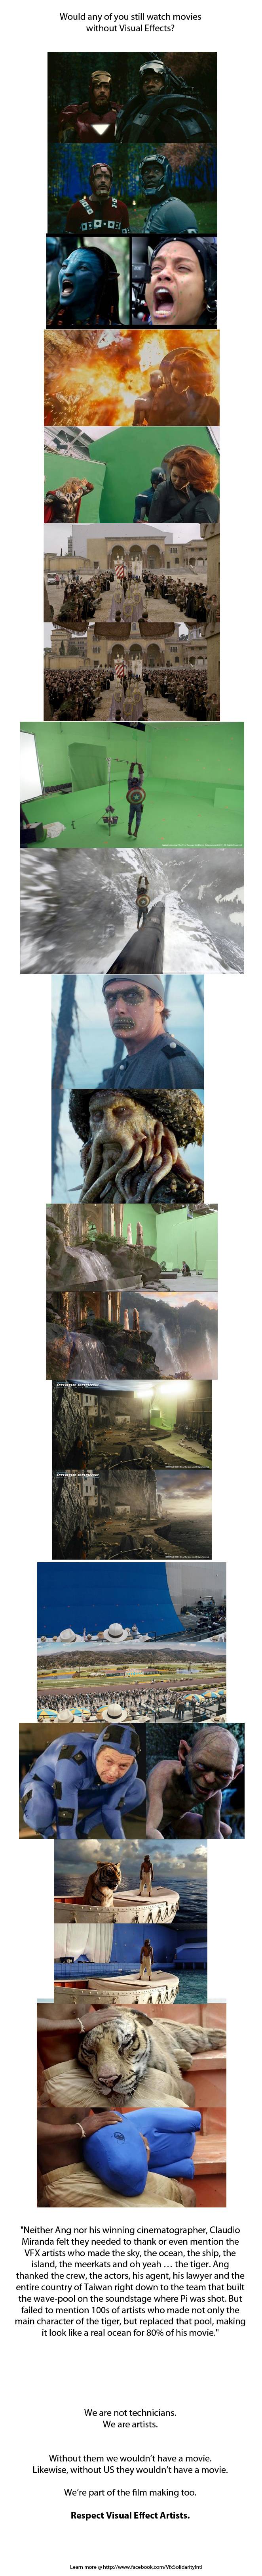 Before and after special effects.